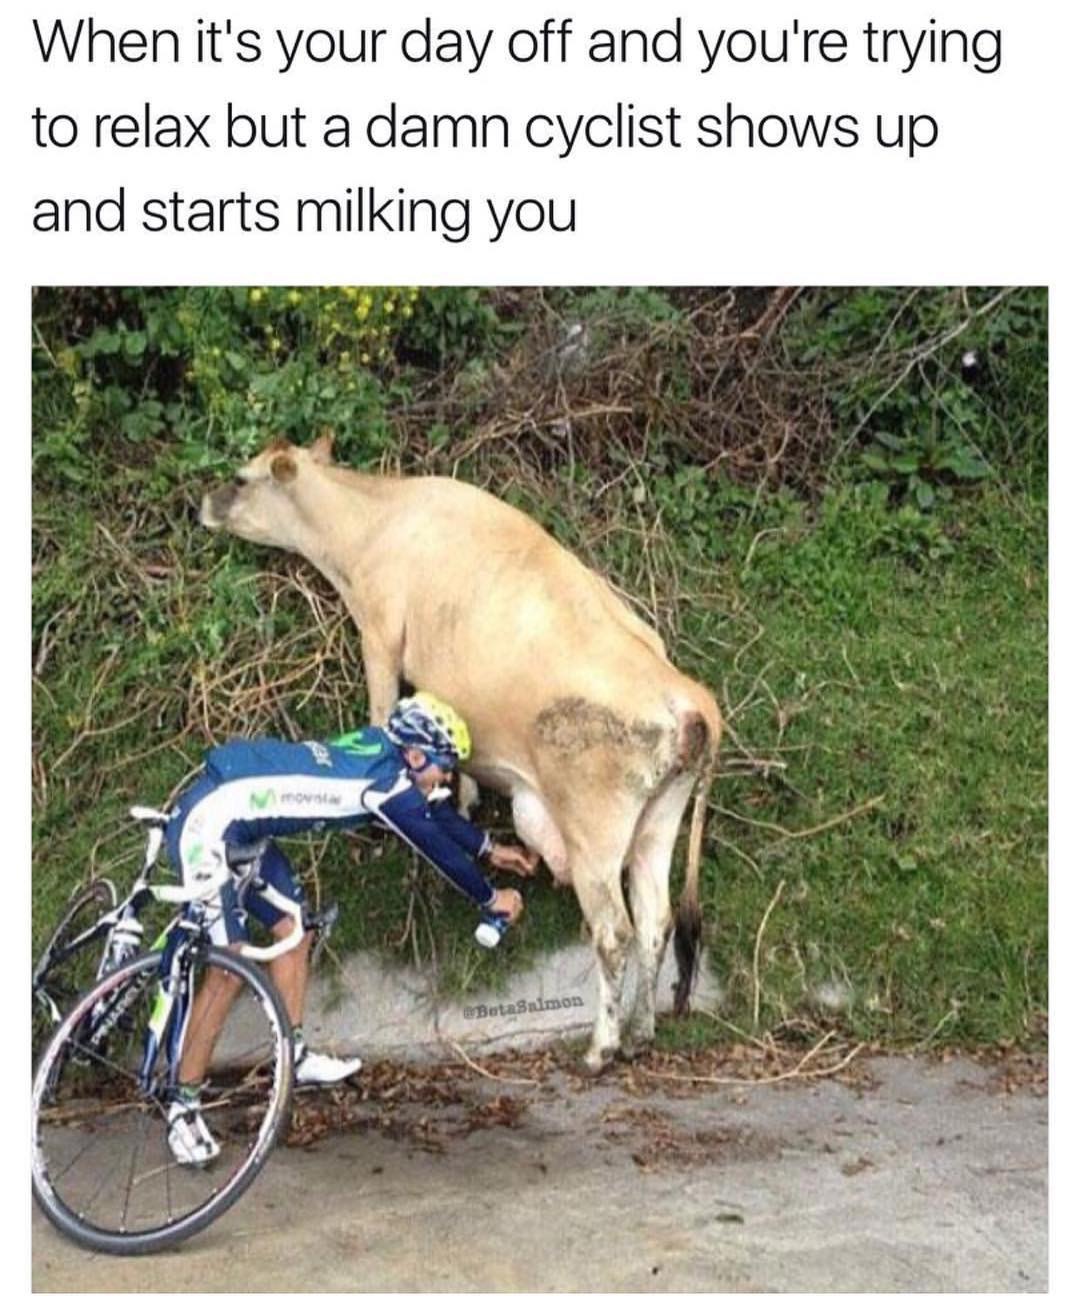 funny cycling - When it's your day off and you're trying to relax but a damn cyclist shows up and starts milking you BetaSnimon